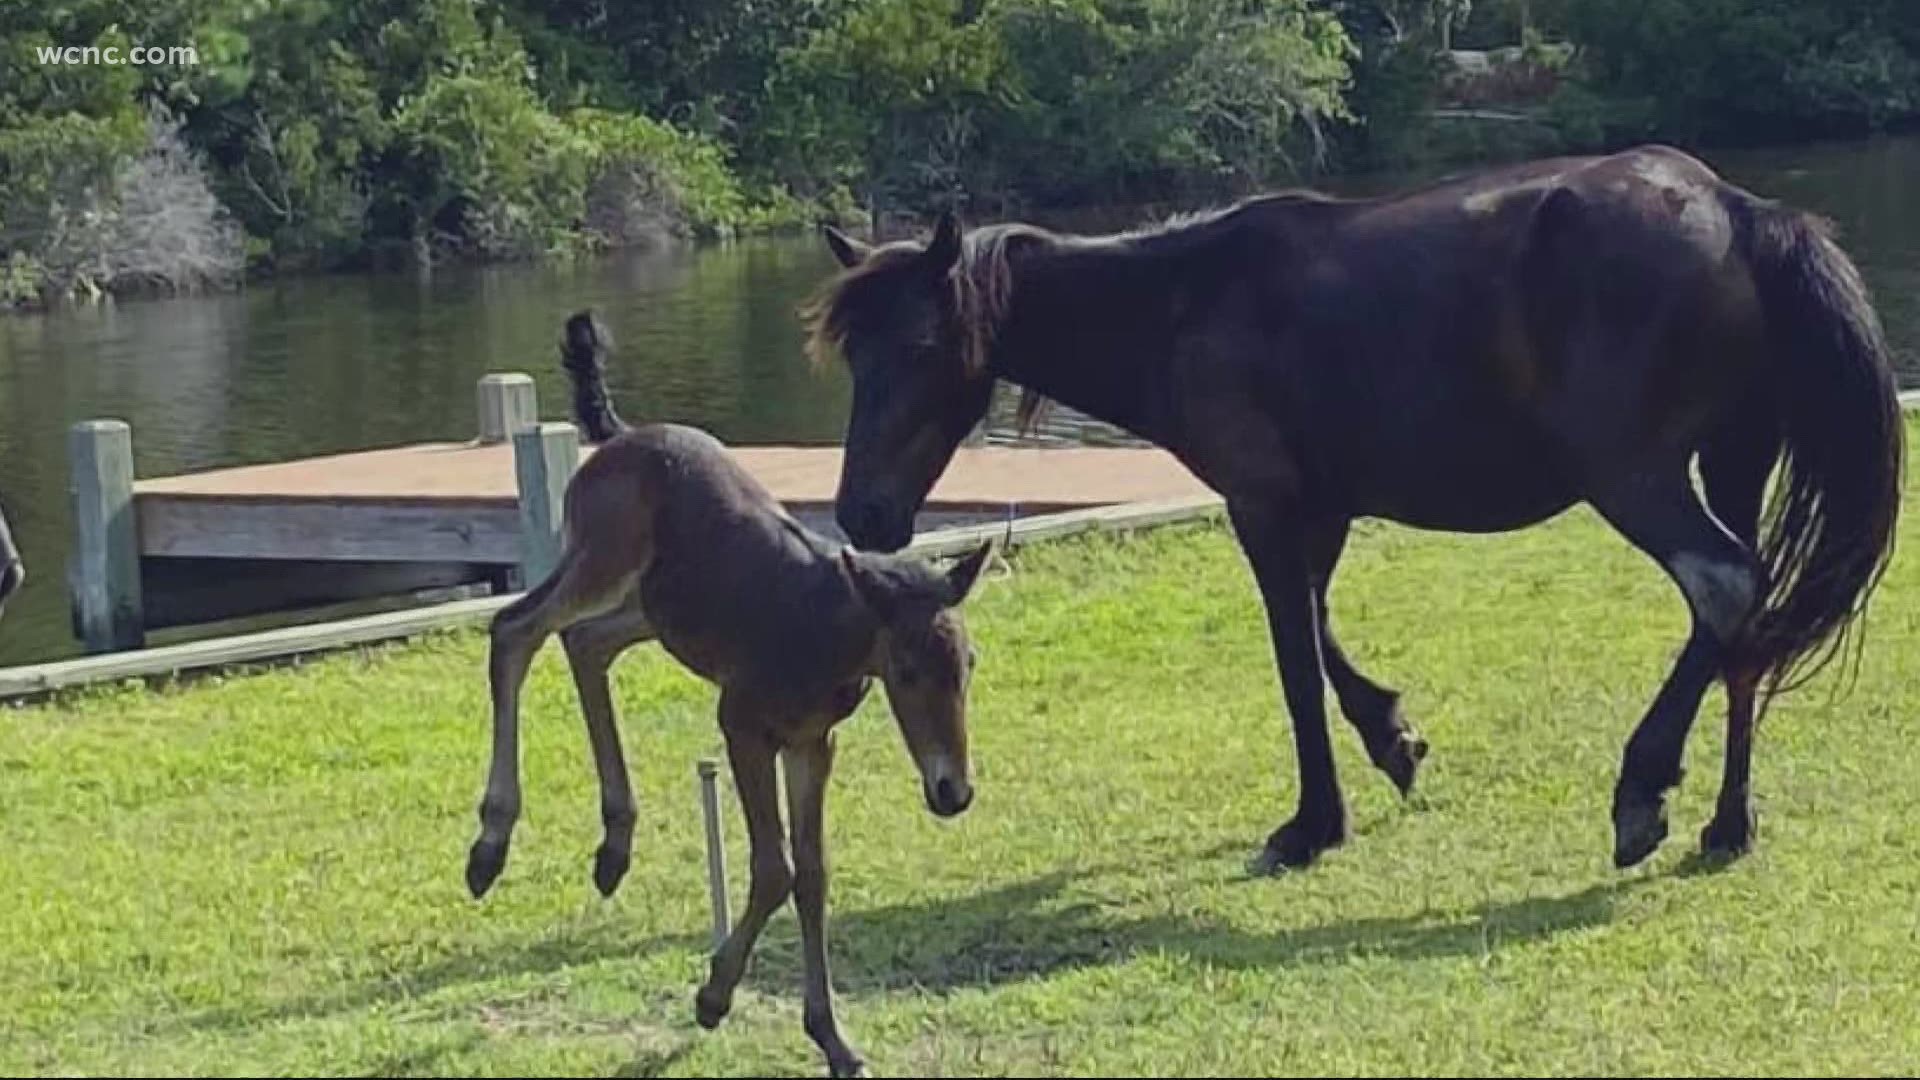 A Facebook post from the Corolla Wild Horse Fund says a 3-day old foal was struggling in a canal. Three fishermen saw what was happening and jumped into action.